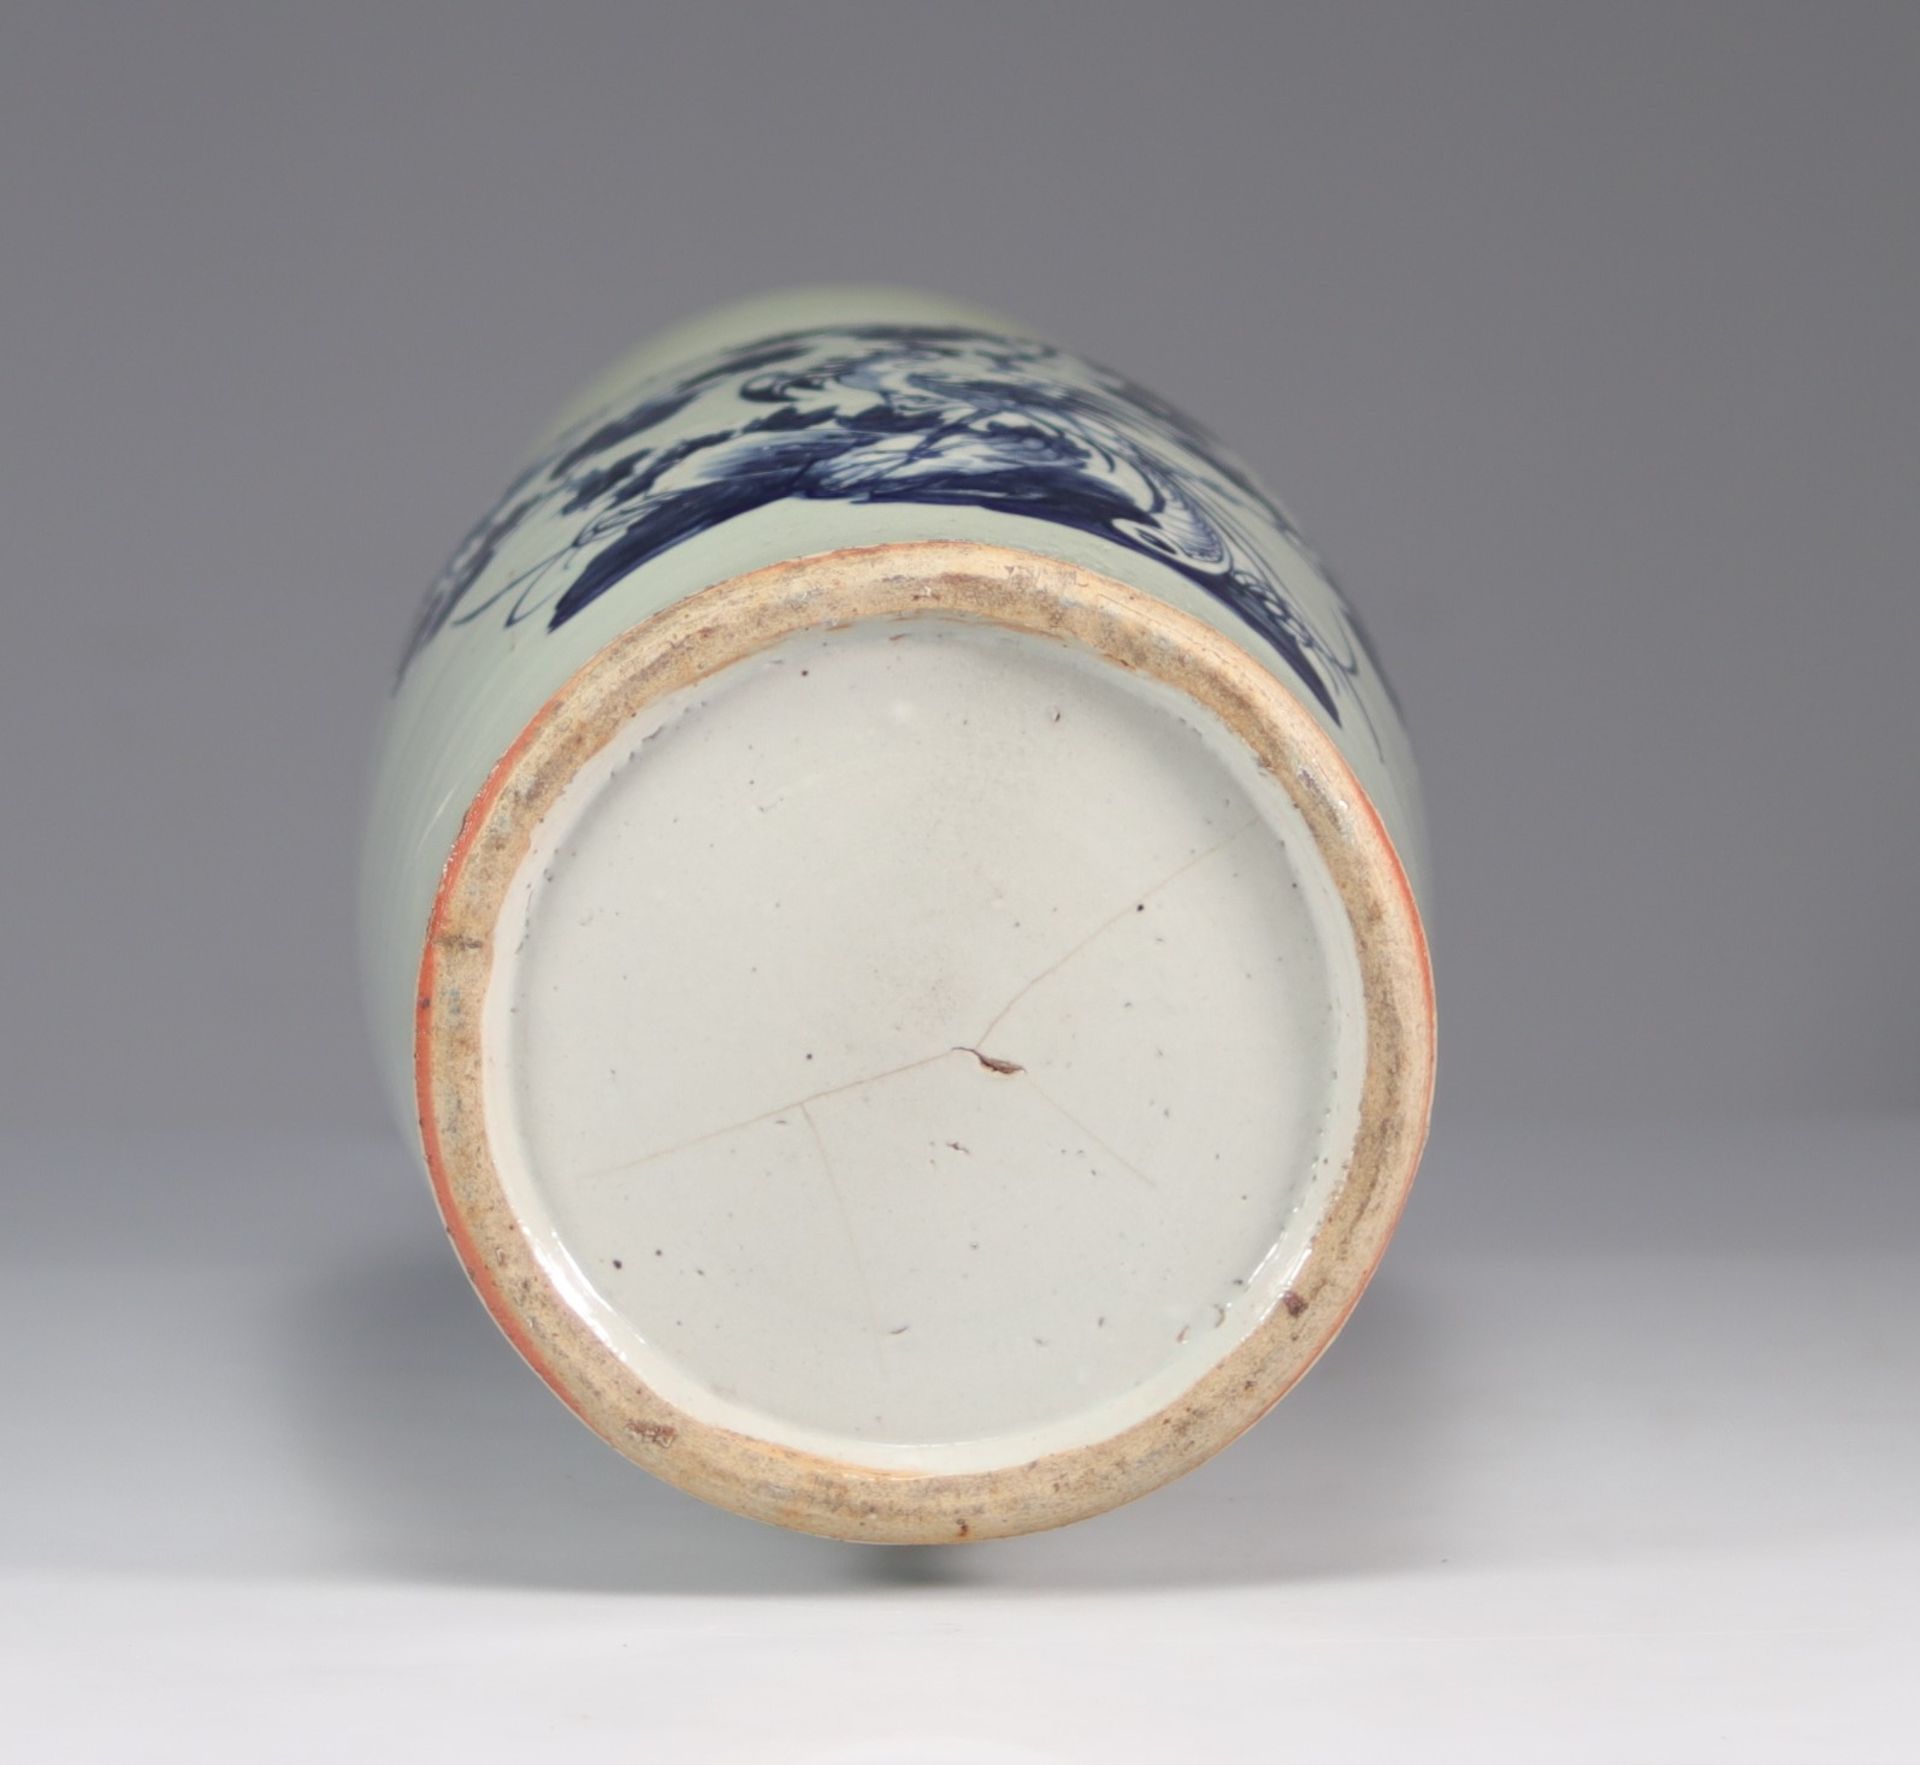 Celadon porcelain vase decorated with dragon and phoenix Qing period - Image 6 of 6